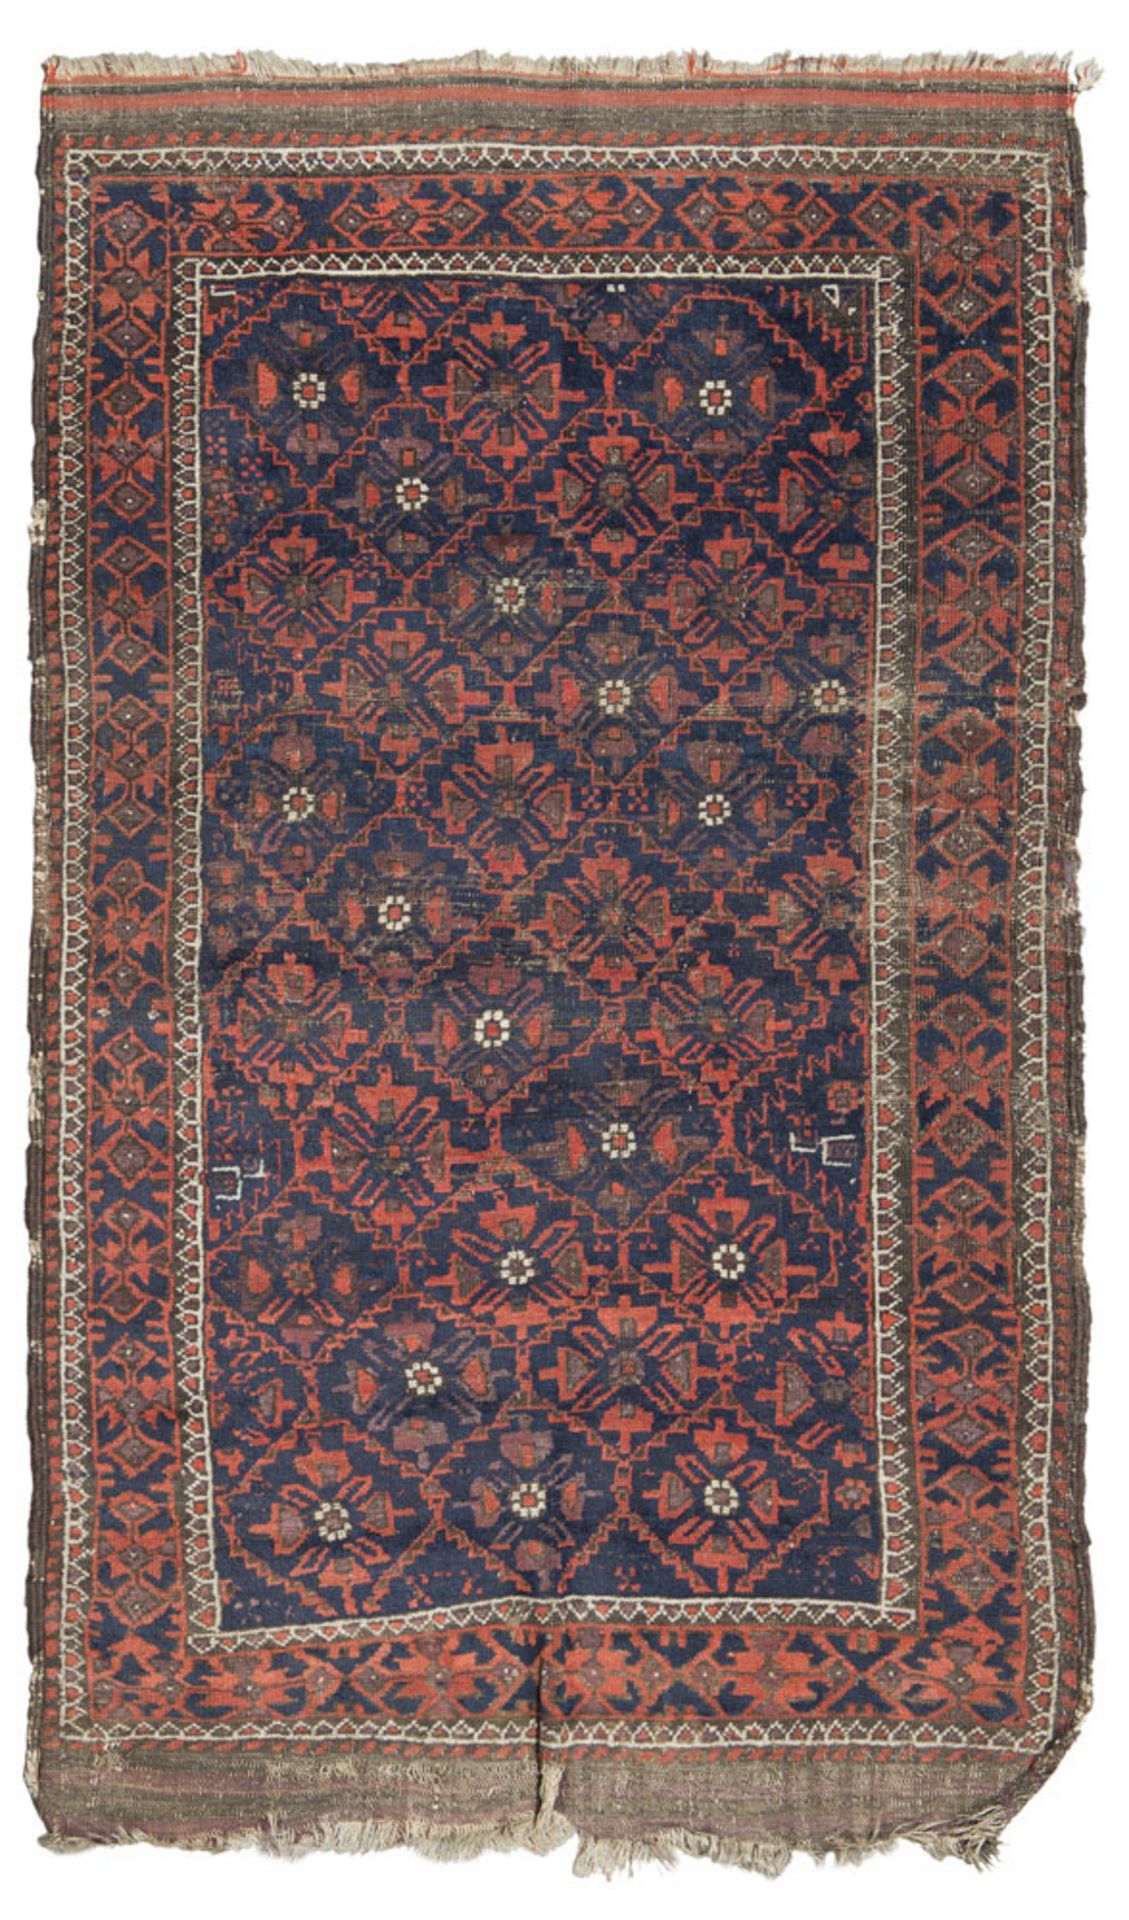 BELUCISTAN CARPET, EARLY 20TH CENTURY with modular patterns of flowers and claws, in the center